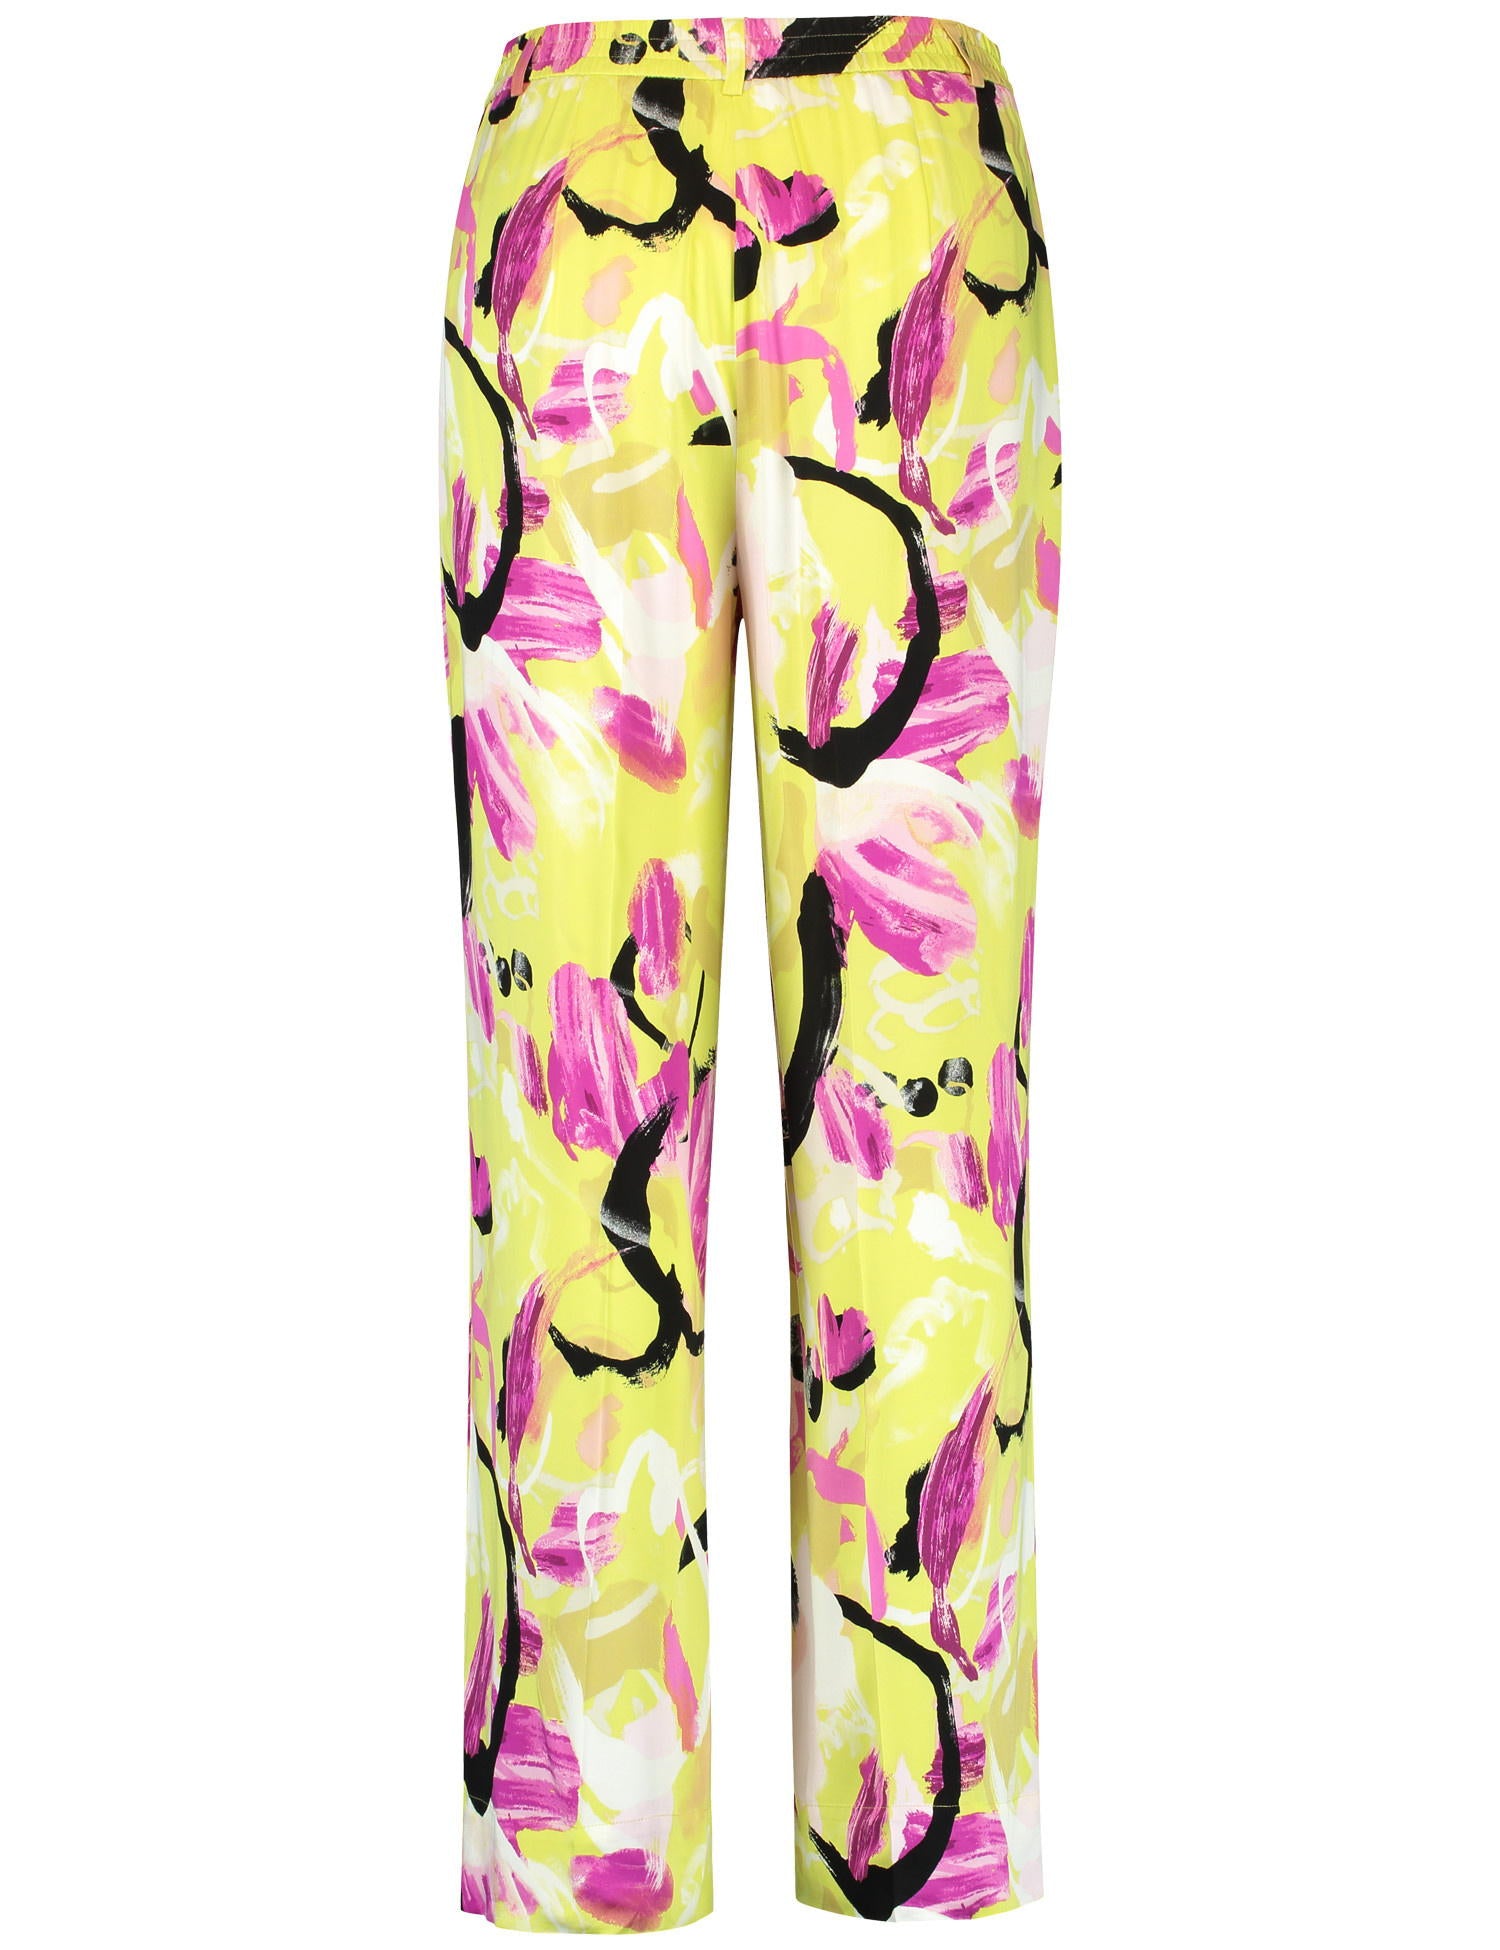 Flowing Palazzo Trousers With A Floral Print_520308-11019_4142_03